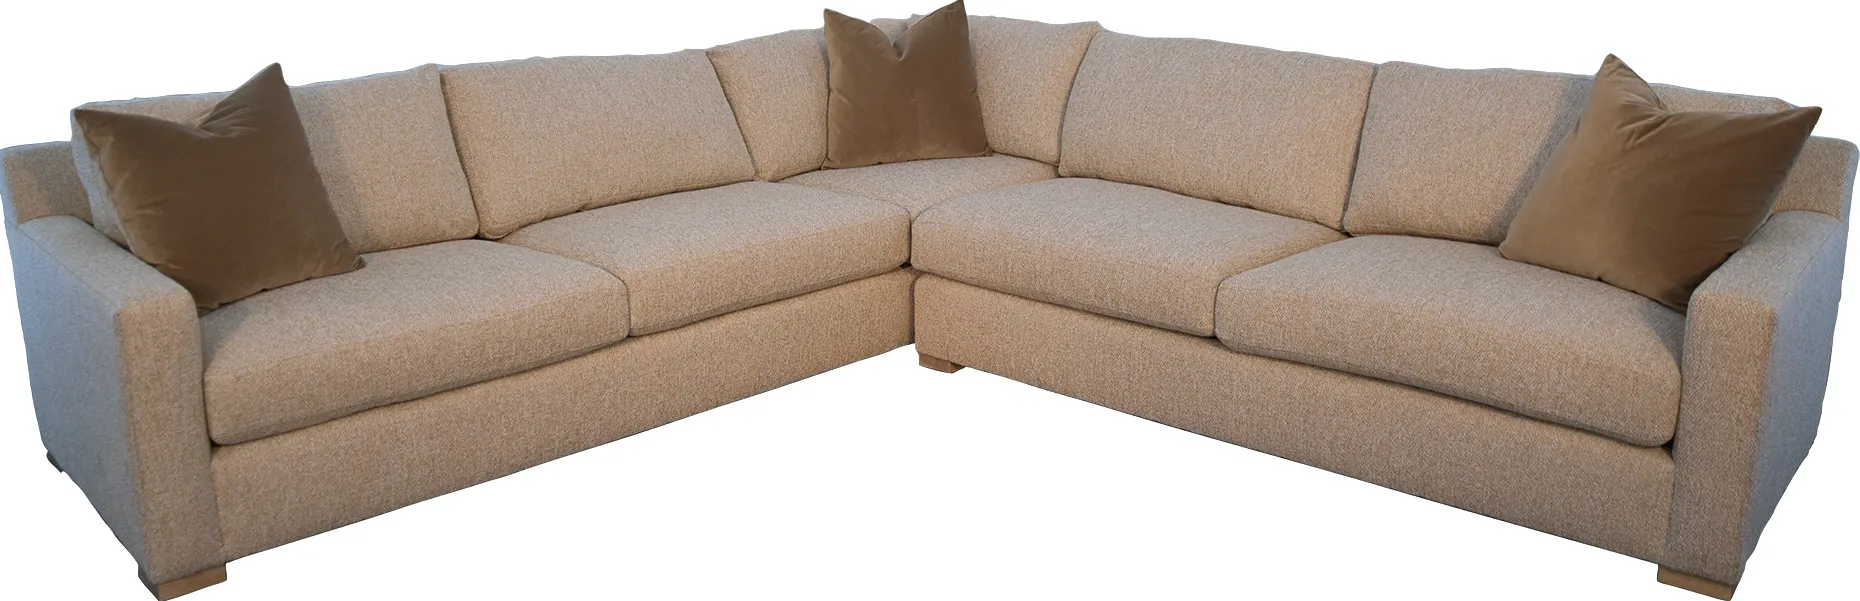 Highland House SUTTON SECTIONAL